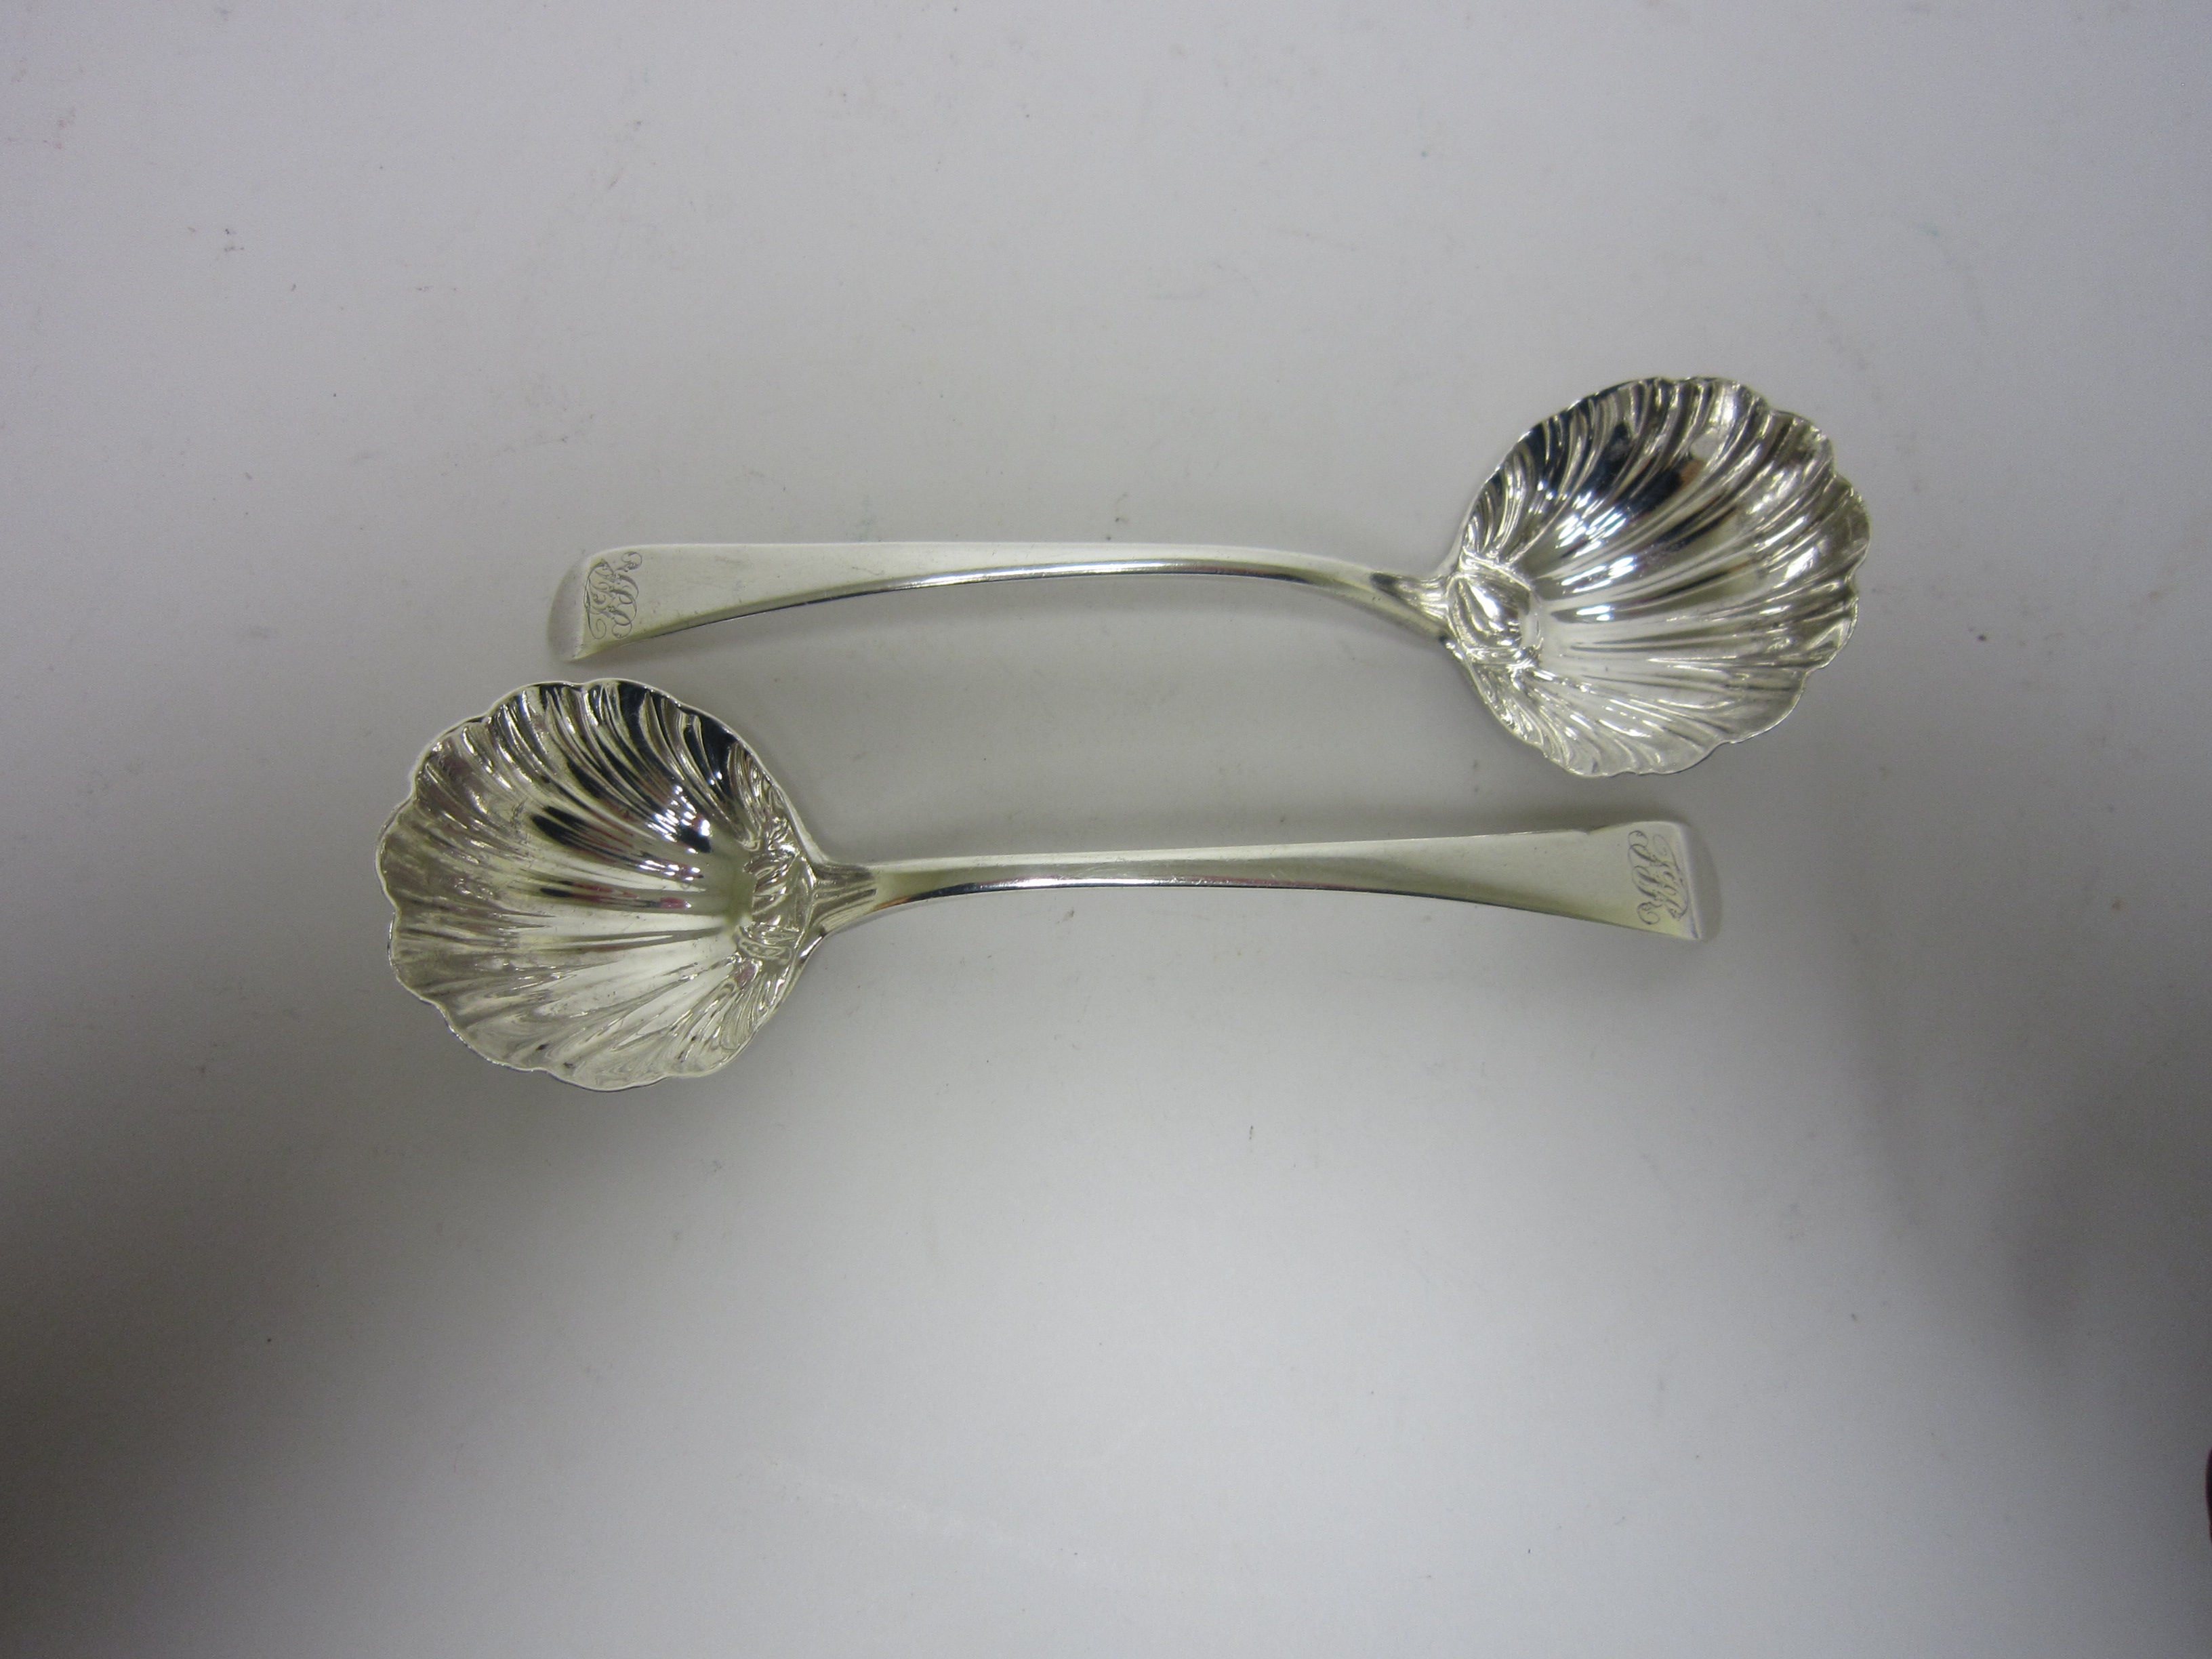 Pair of George III silver Sauce Ladles old english pattern engraved initials, shell bowls, London - Image 3 of 3